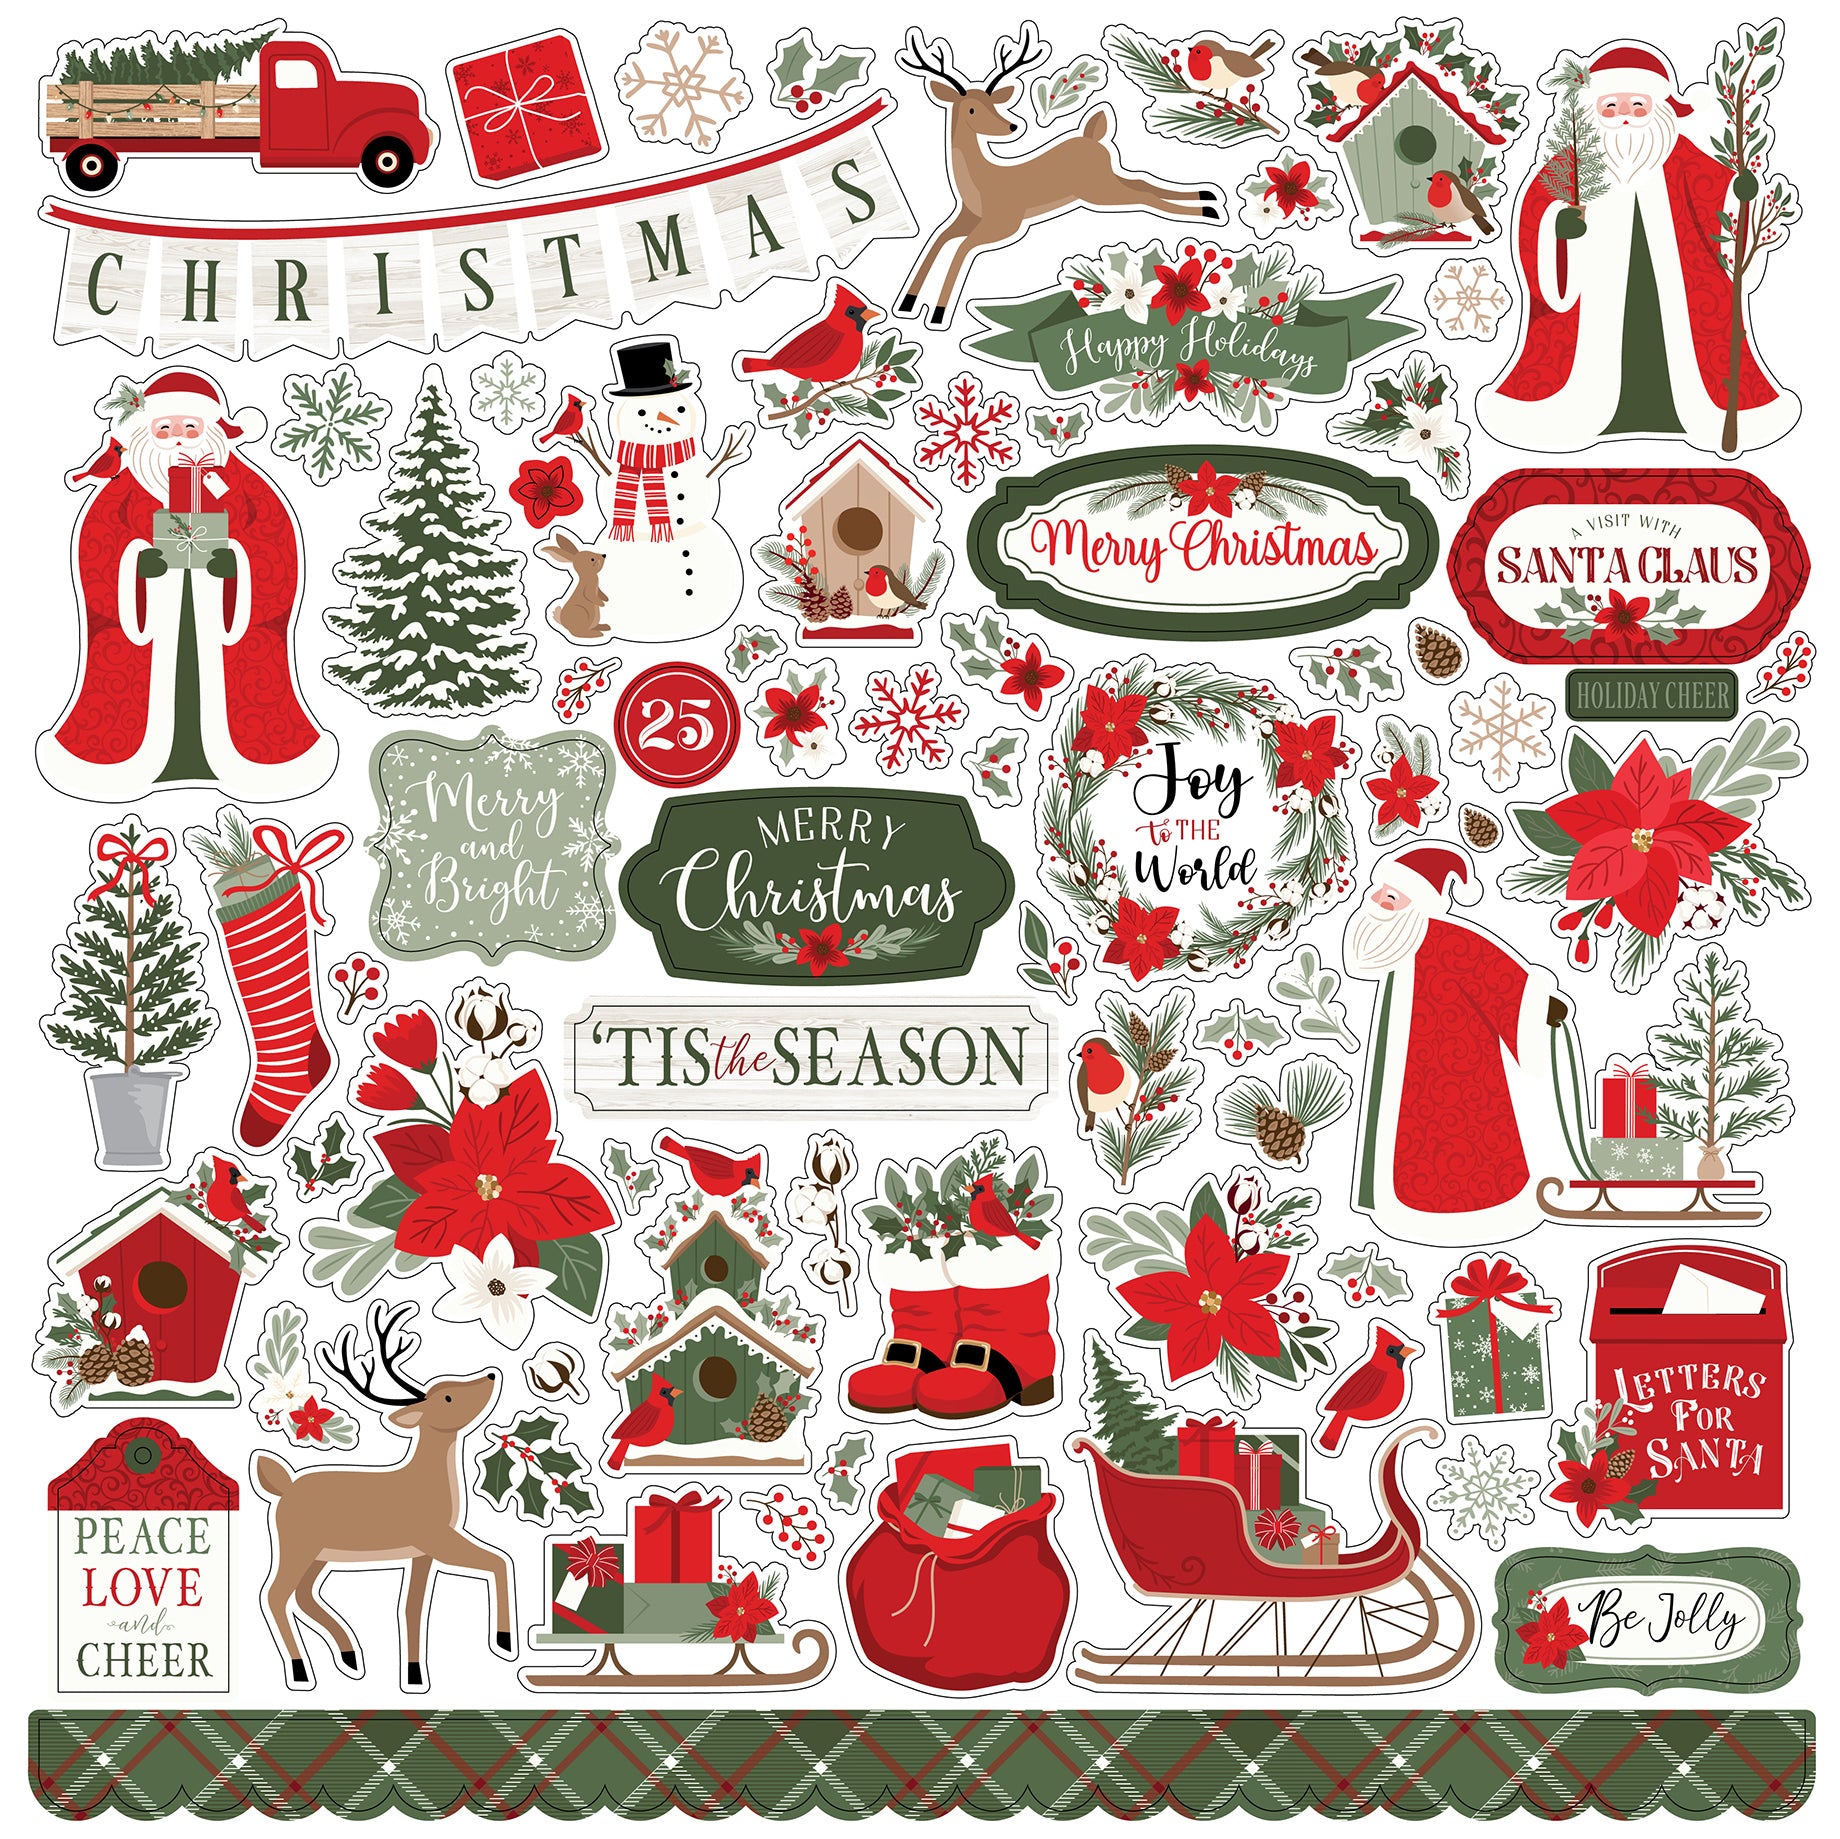 Christmas Time Collection Cardinal Floral 12 x 12 Double-Sided Scrapbook  Paper by Echo Park Paper